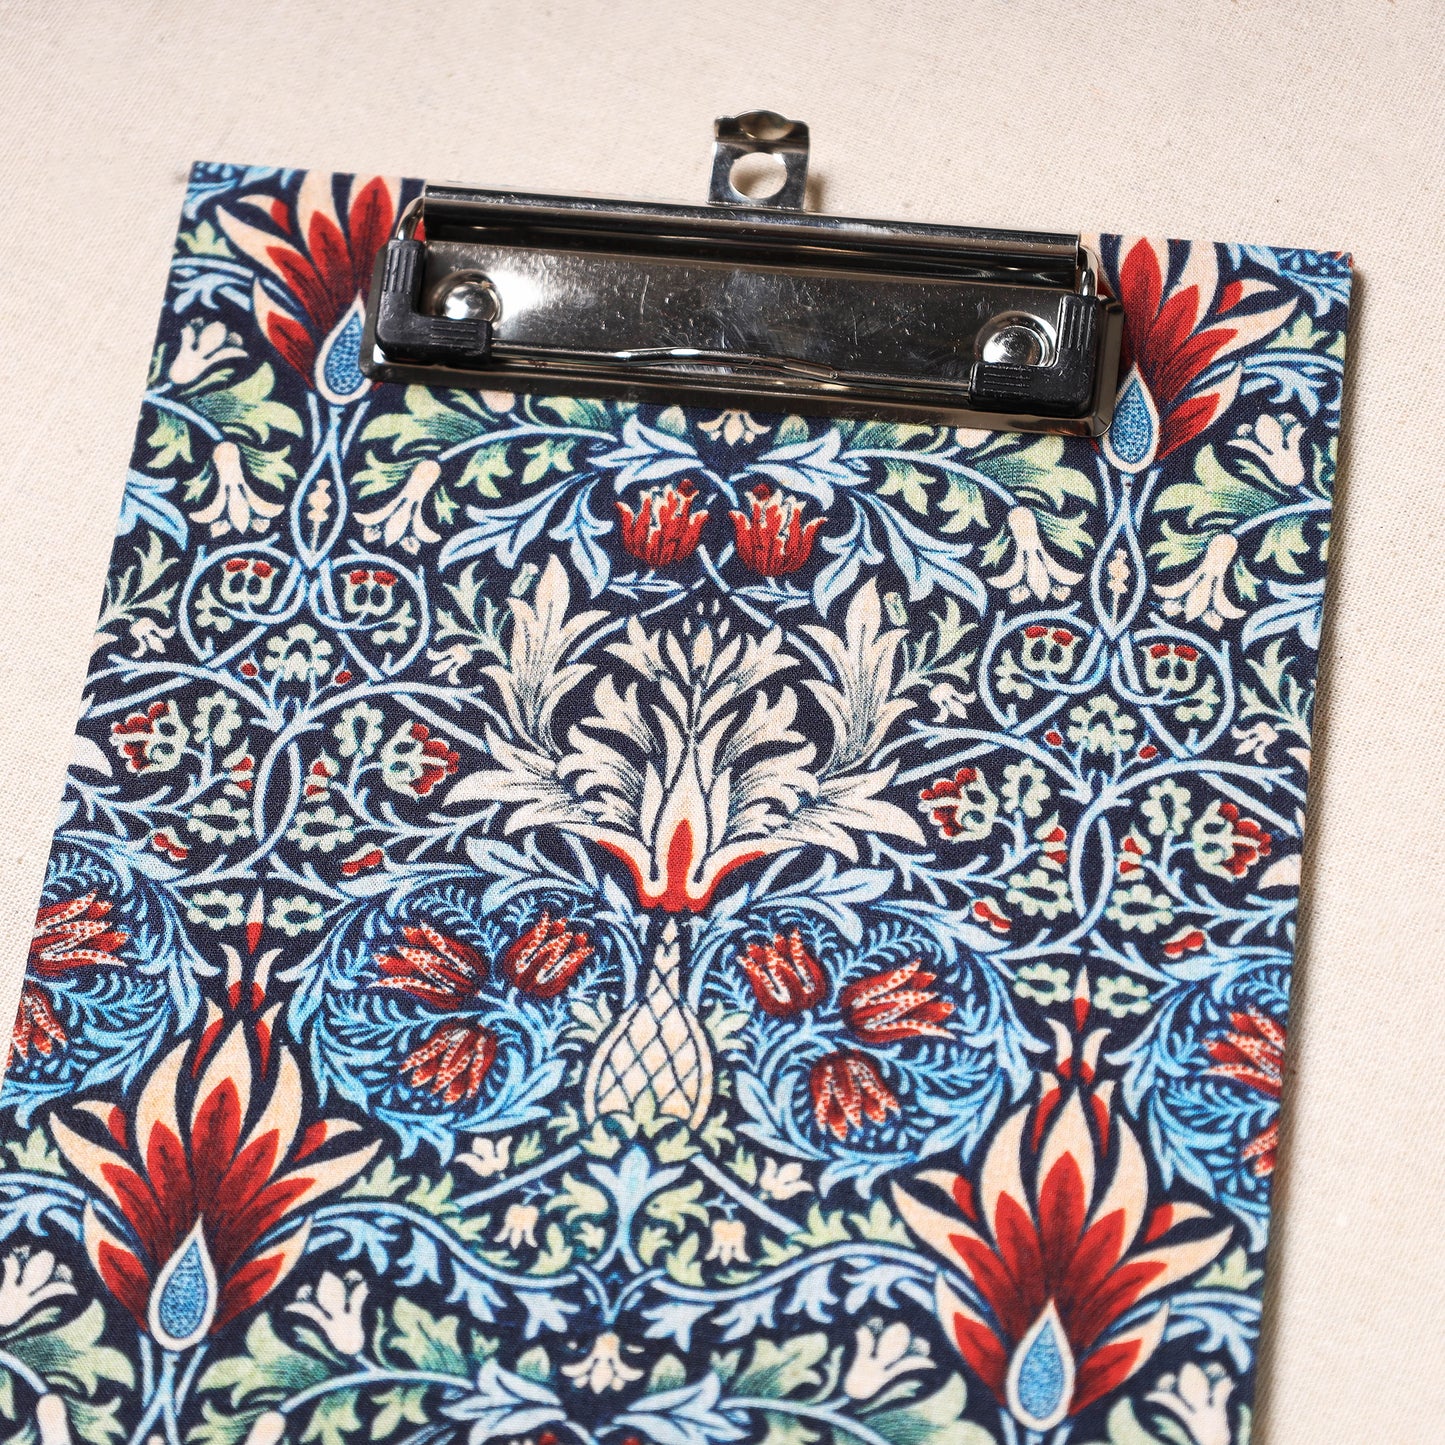 Floral Printed Handcrafted Clipboard (8 x 6 in)